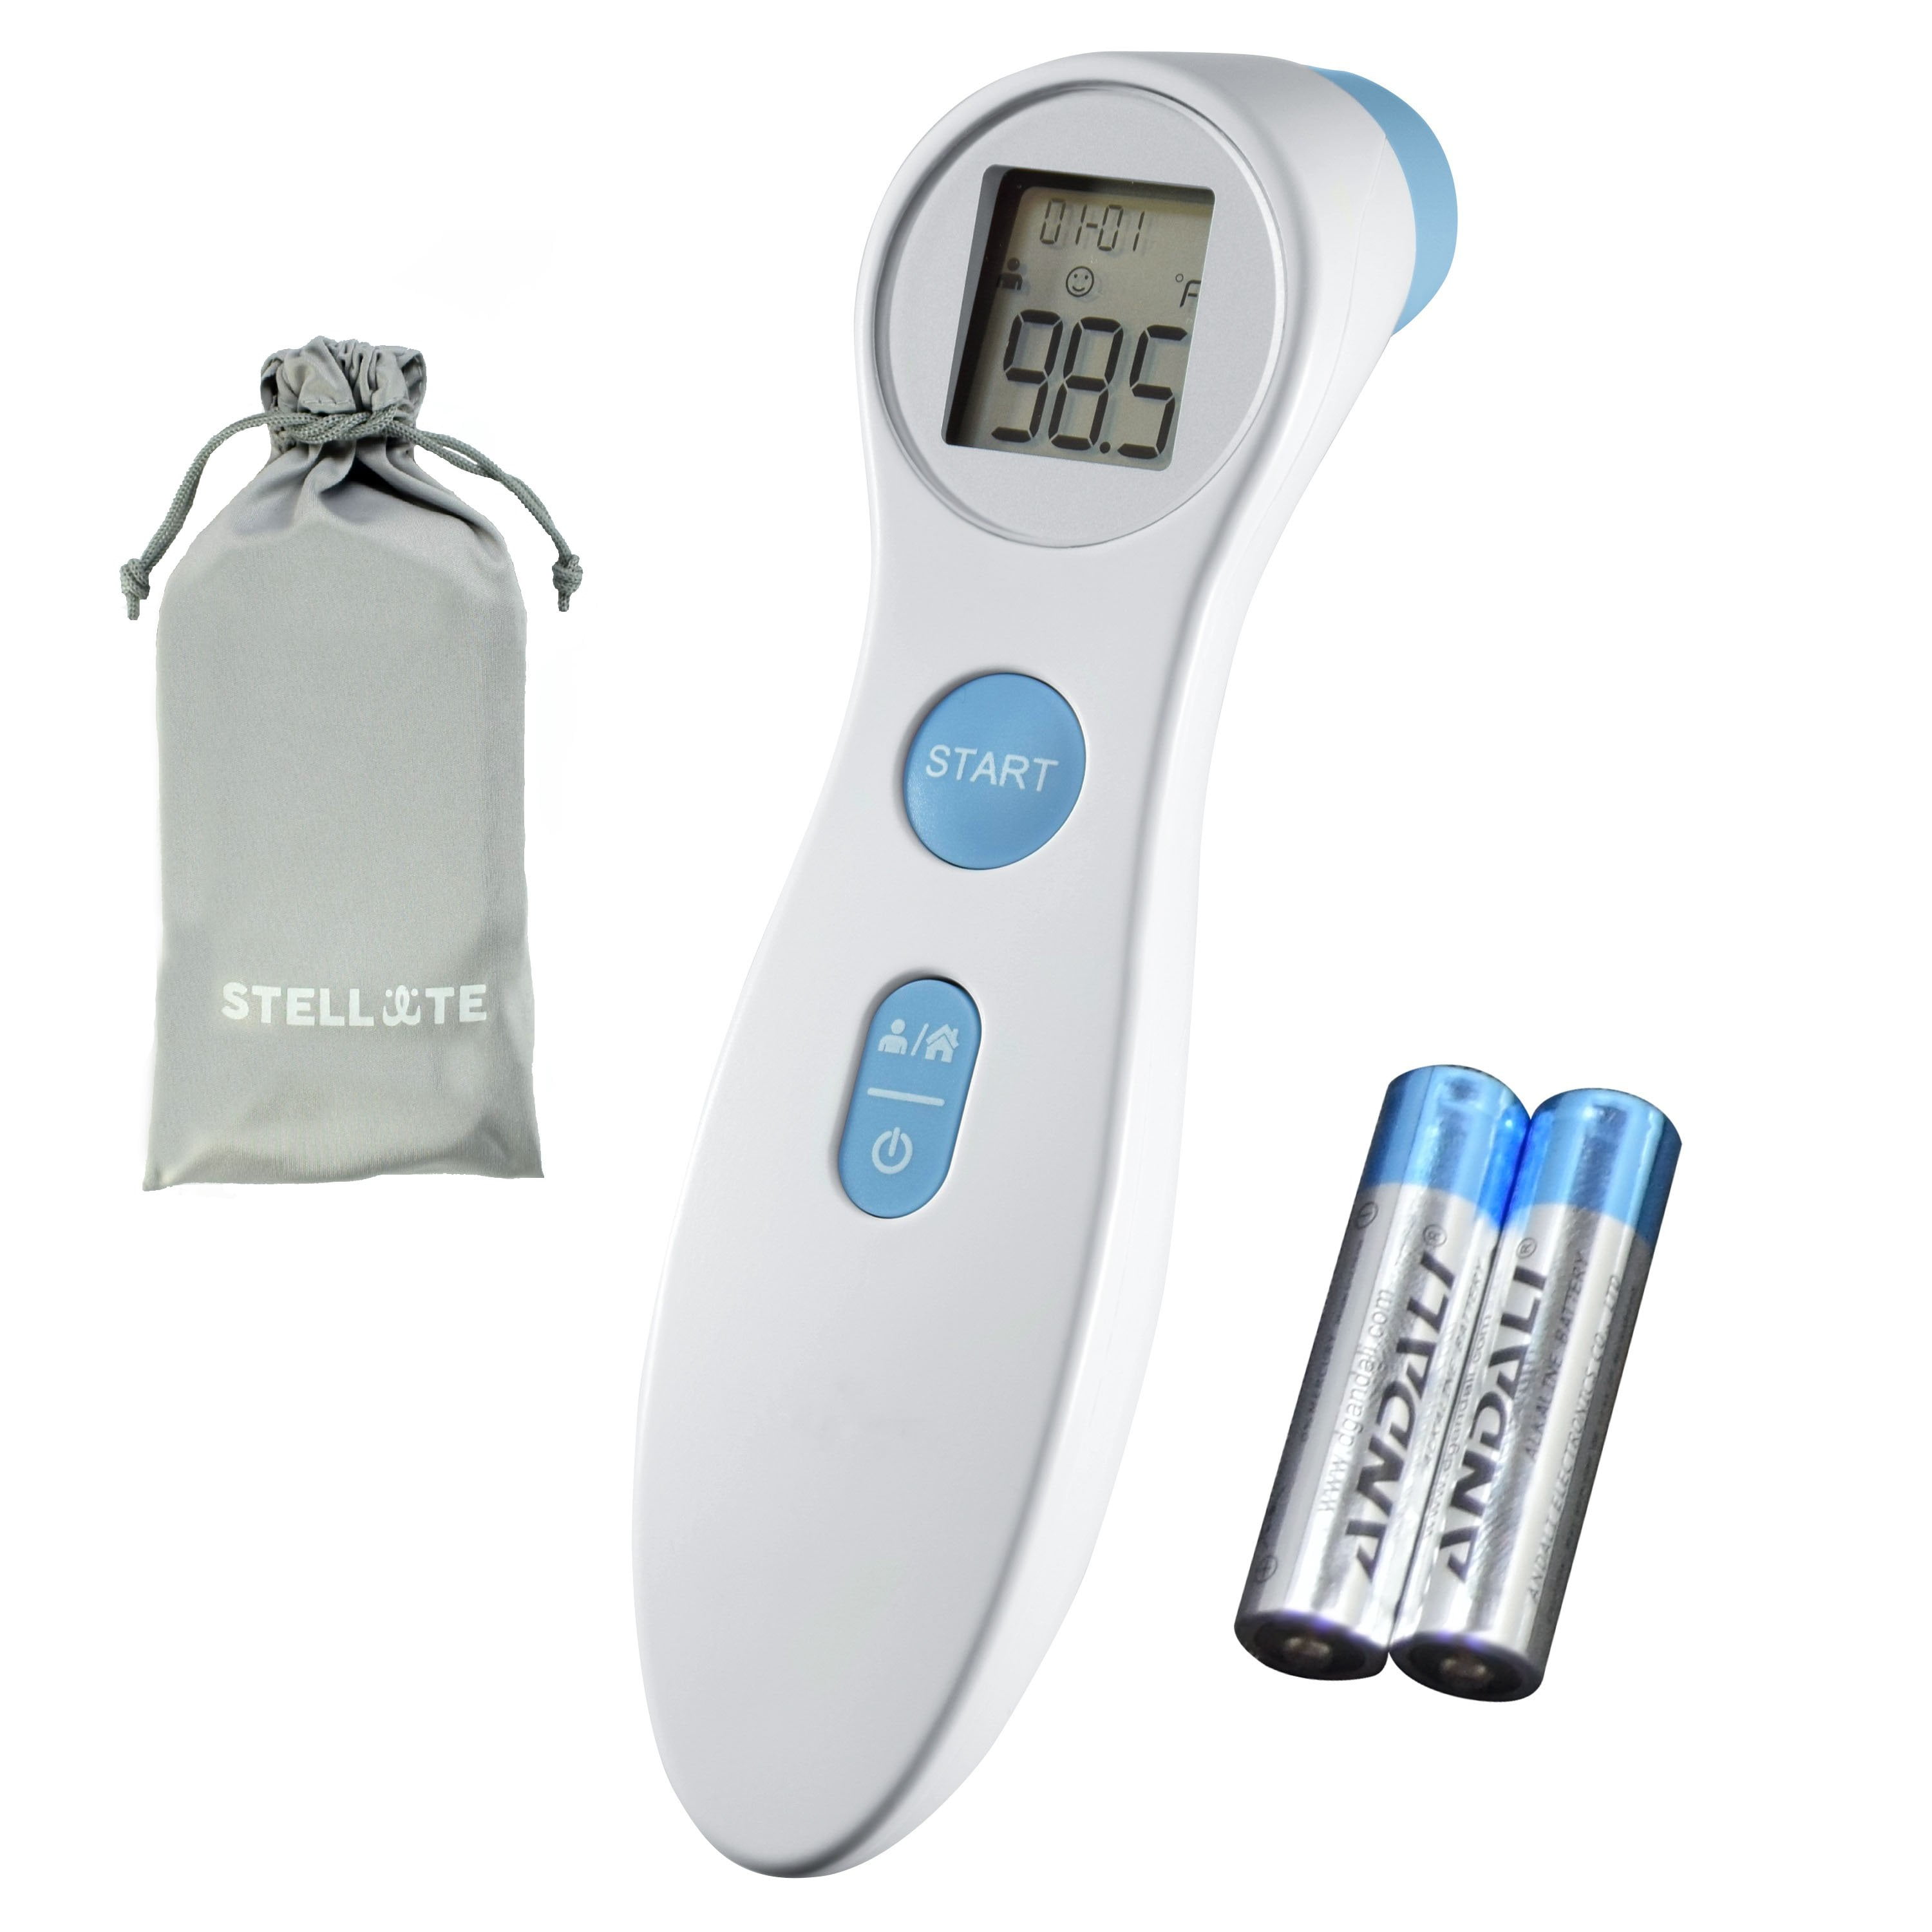 Digital Thermometer FLEXI Baby Child Fever Medical 5 FREE Forehead Thermometers 